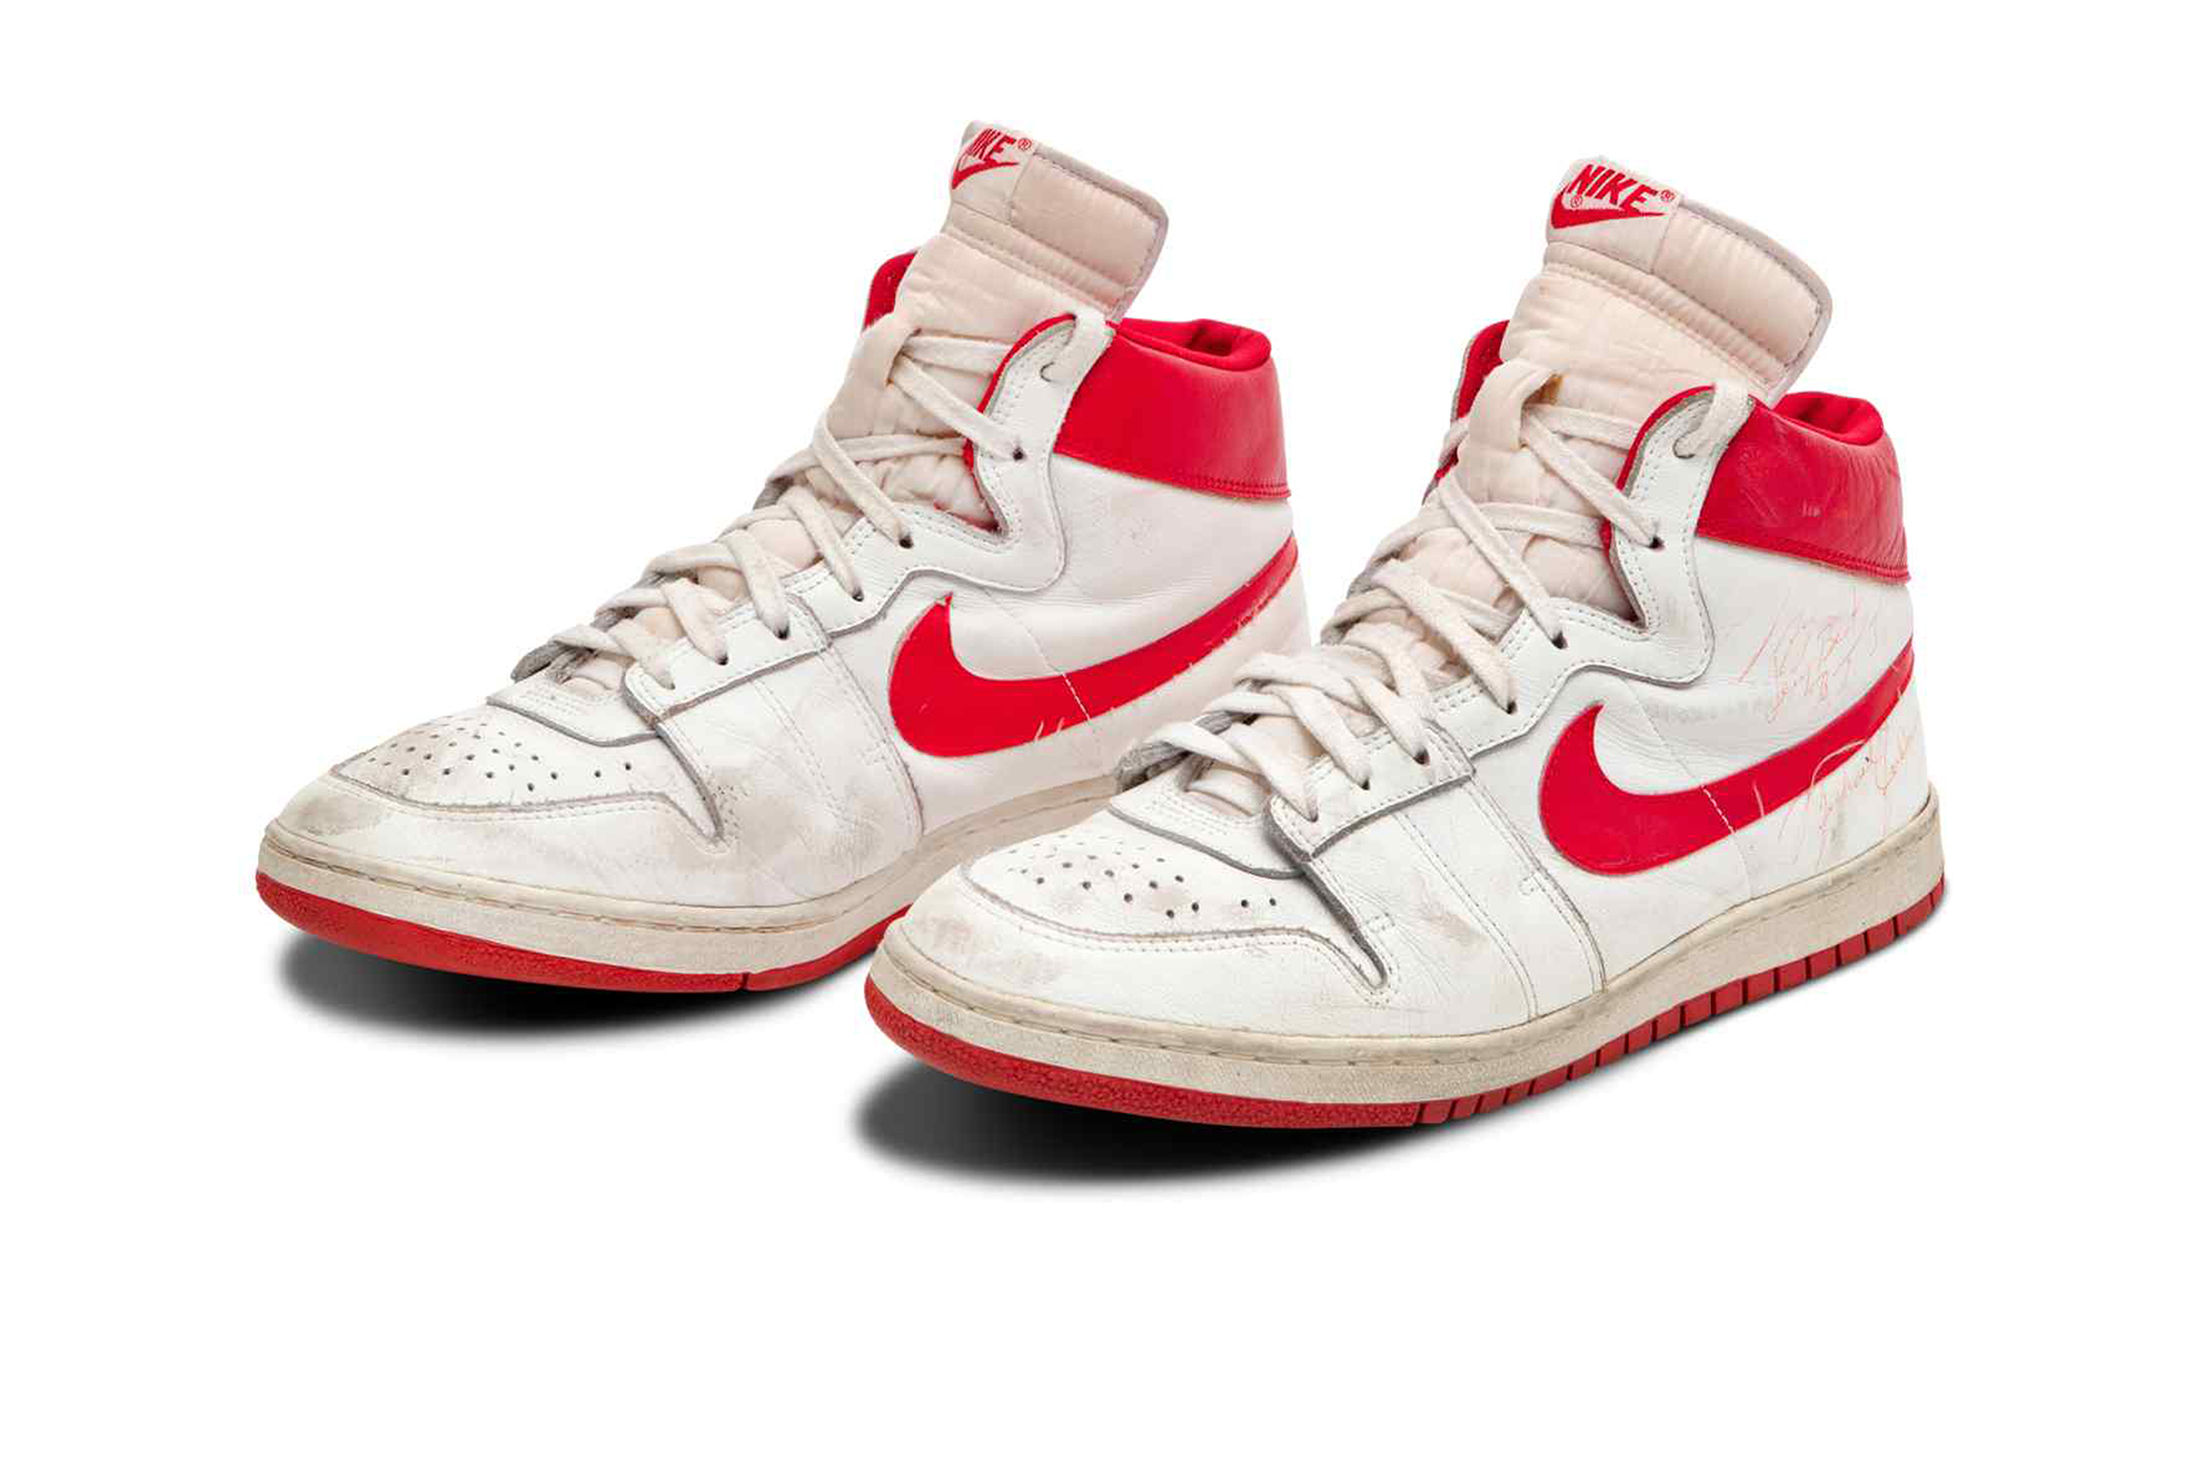 These Michael Jordan's trainers just sold for a record S$1.97 million